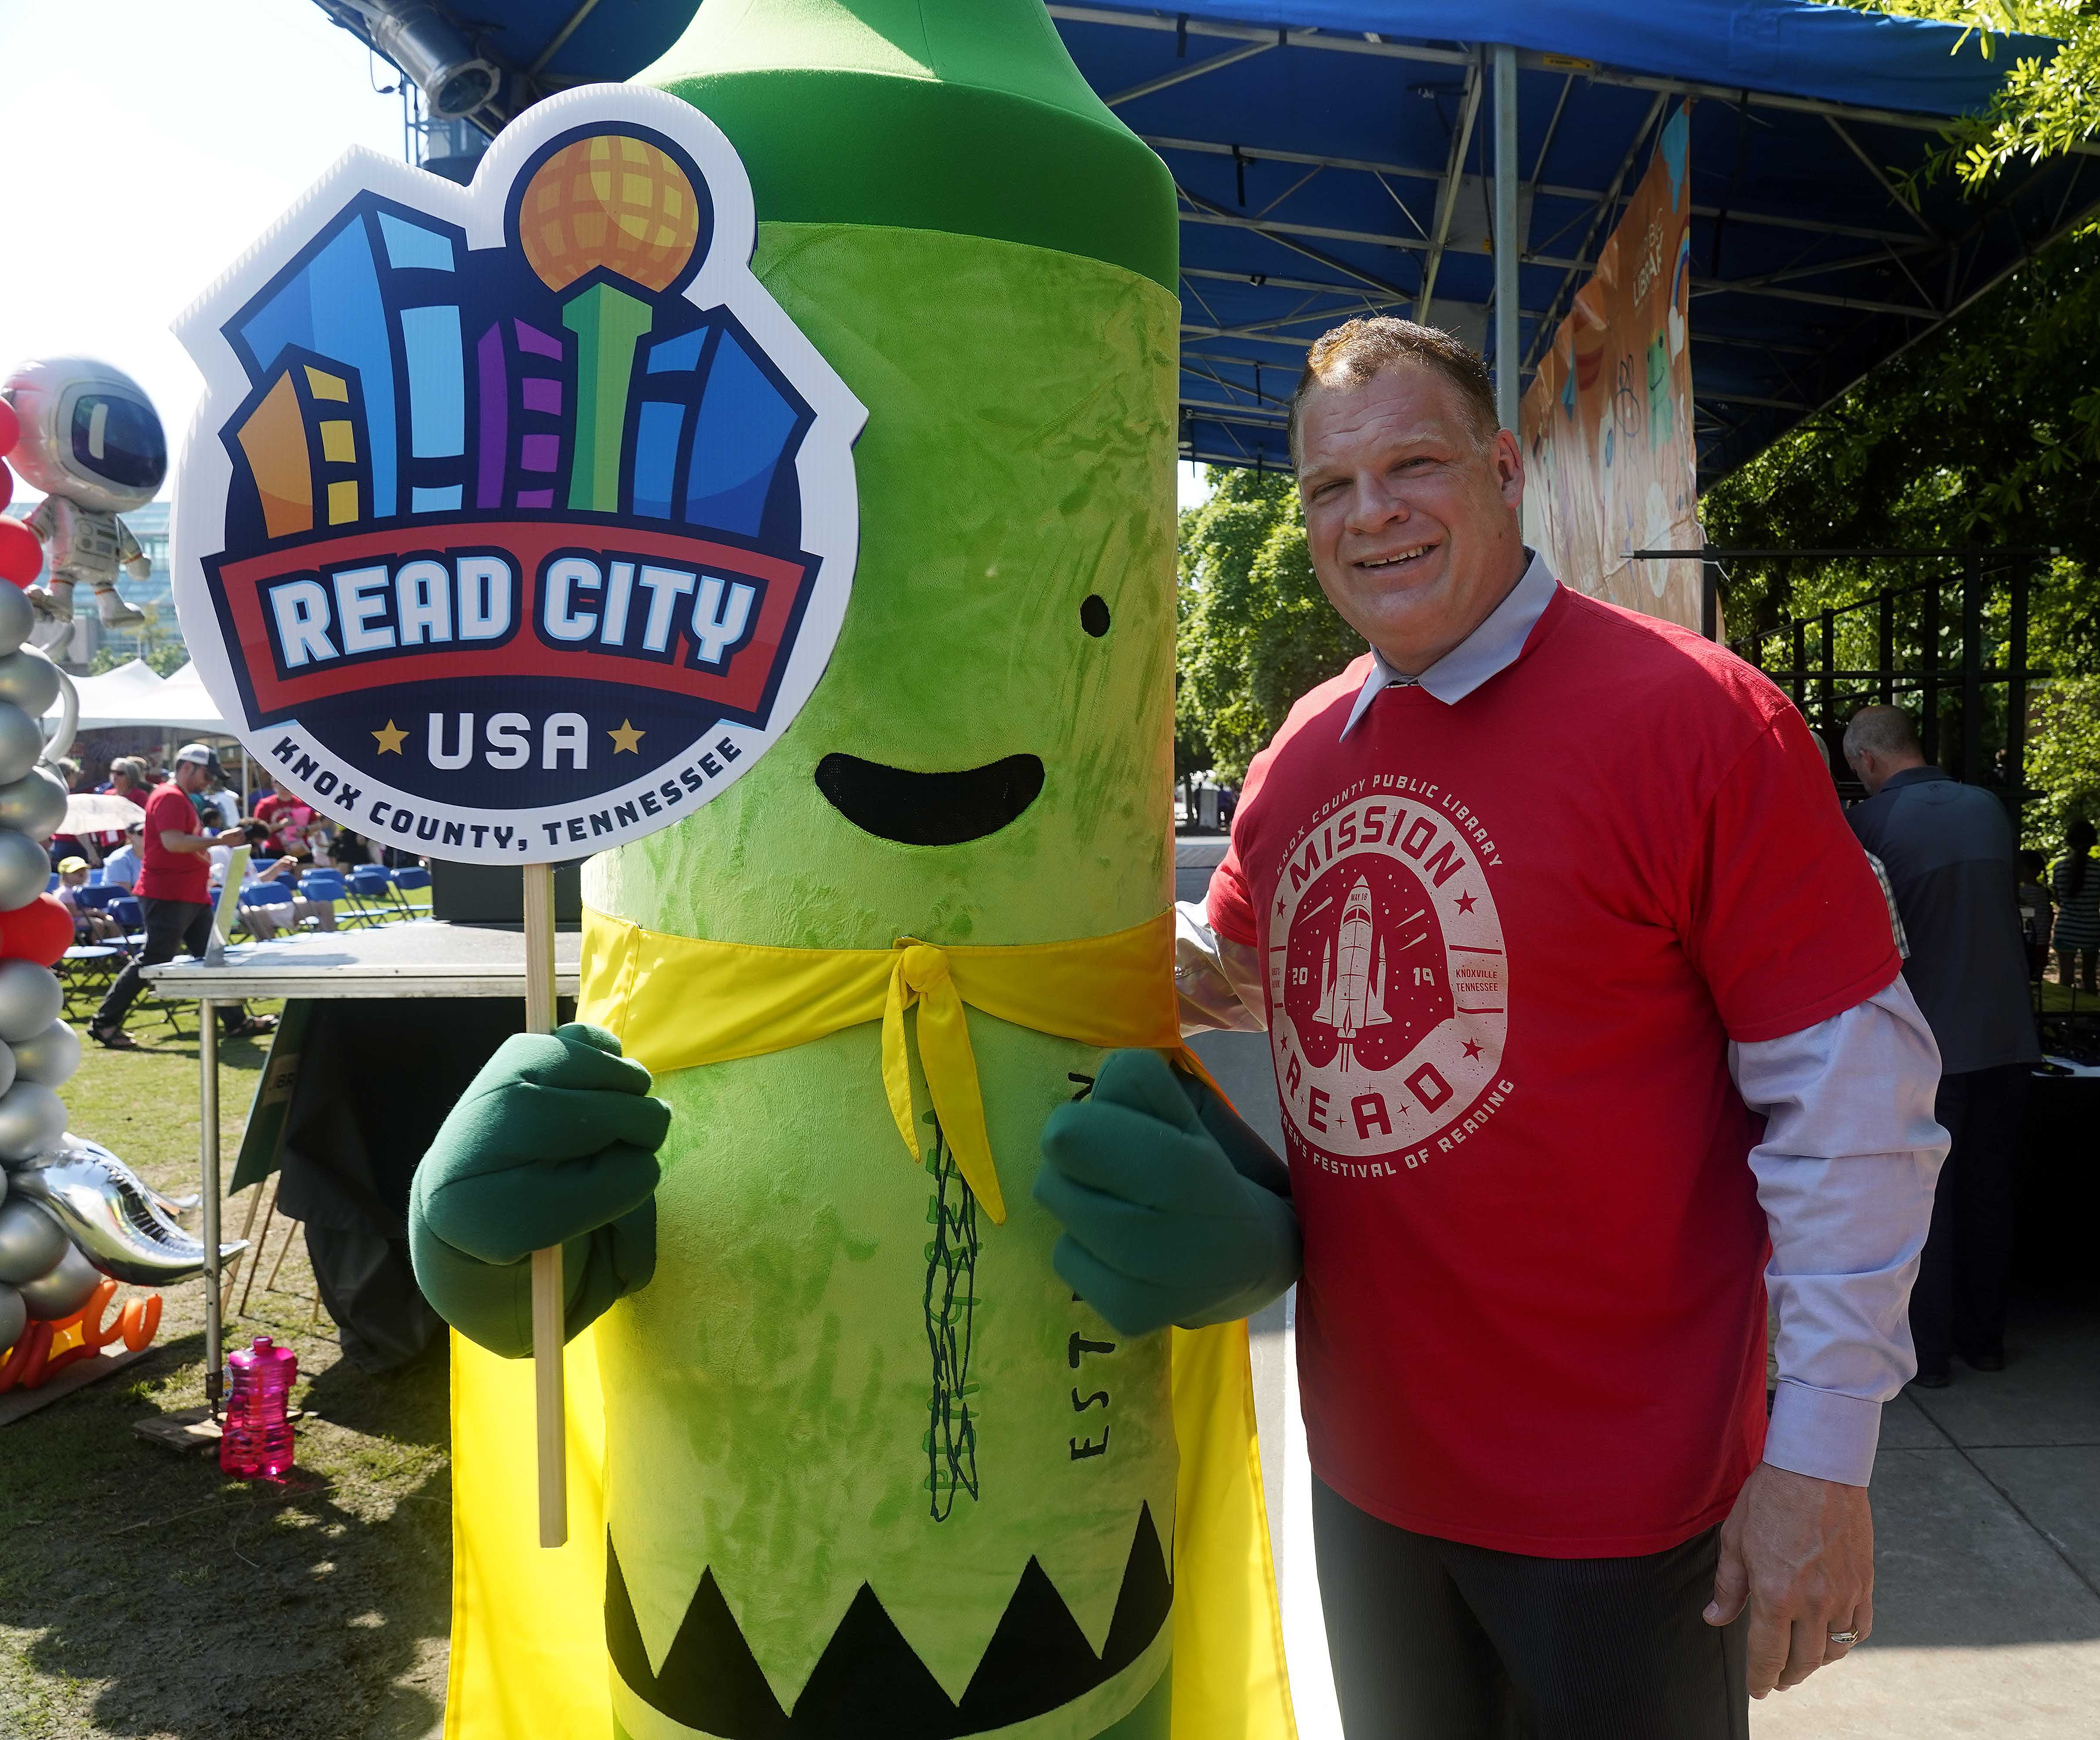 Children's Festival of Reading: Knox County mayor posing with man in crayon suit